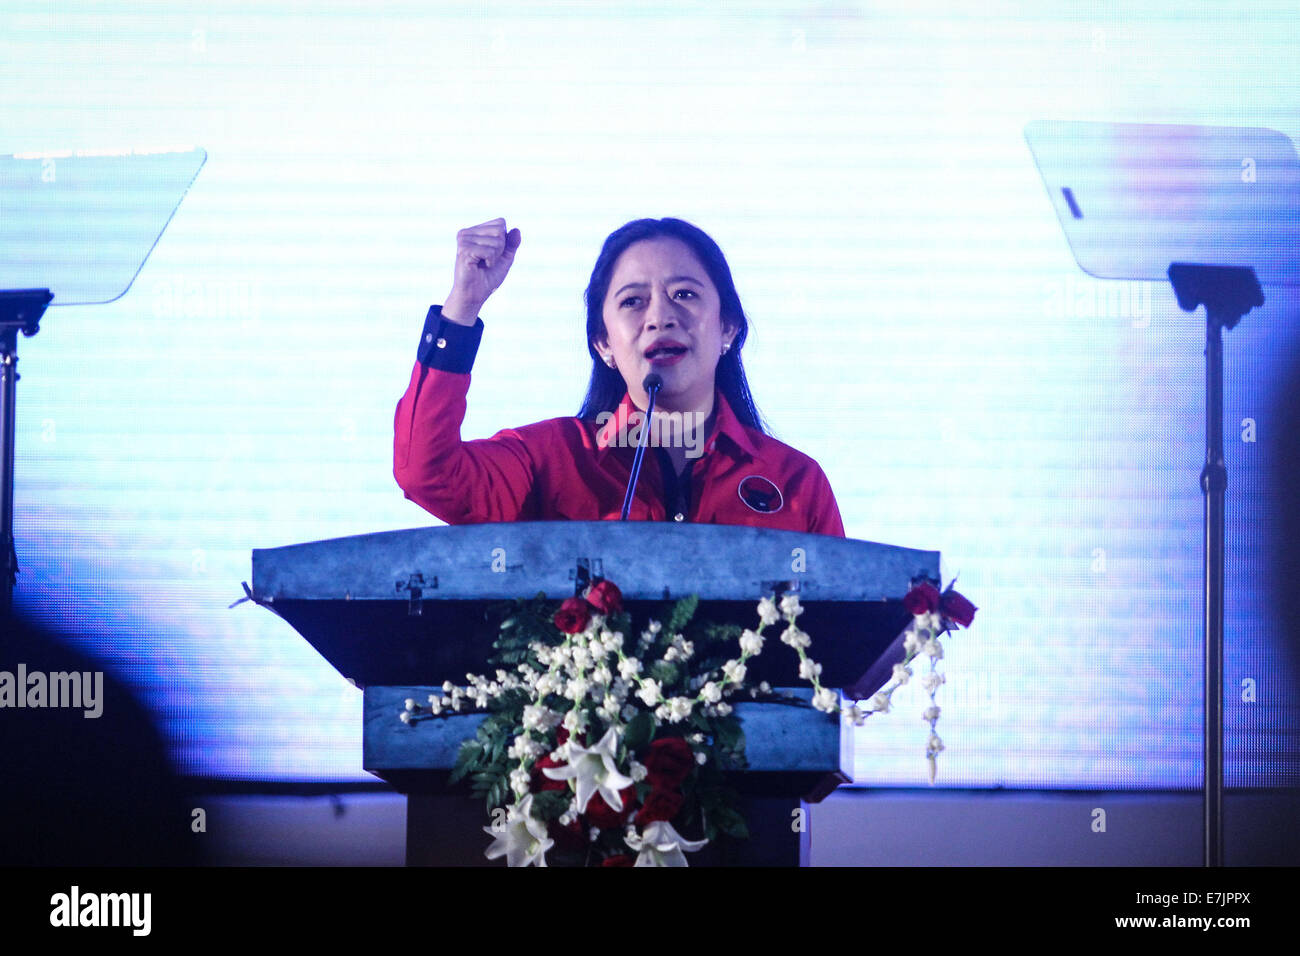 Semarang, Indonesia. 19th September, 2014. Chairman of PDIP party who also the daughter of Megawati, Puan Maharani gestures as she delivers her speech during the 4th national working meeting of PDI-P at Marina Convention Hall in Semarang, Central Java, Indonesia. The national meeting attended by 1,590 party cadres from all over Indonesia and take place from 19-21 September 2014. The meeting is expected to change the 10-year mindset of the PDI-P, as it has switched to being the ruling party from being the opposition party. Credit:  PACIFIC PRESS/Alamy Live News Stock Photo